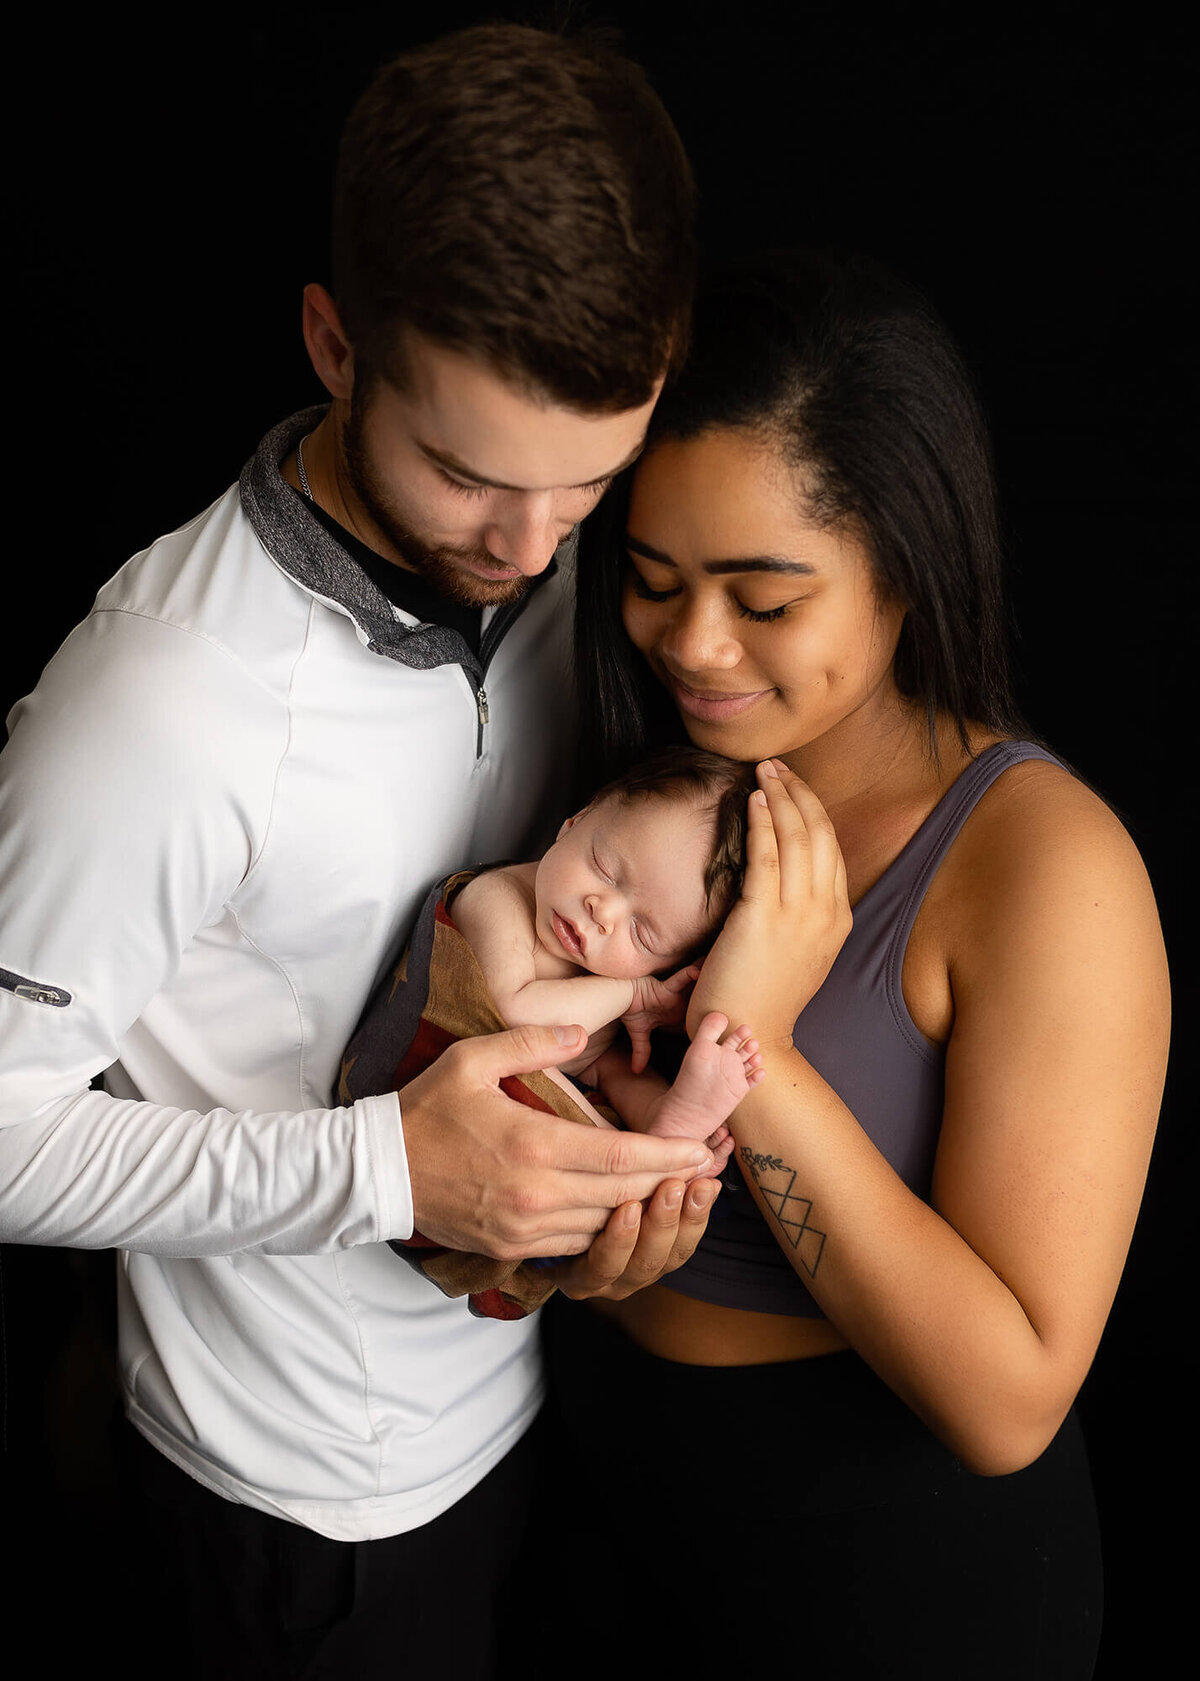 Baby boy posed with his mom and dad during his newborn portrait session.